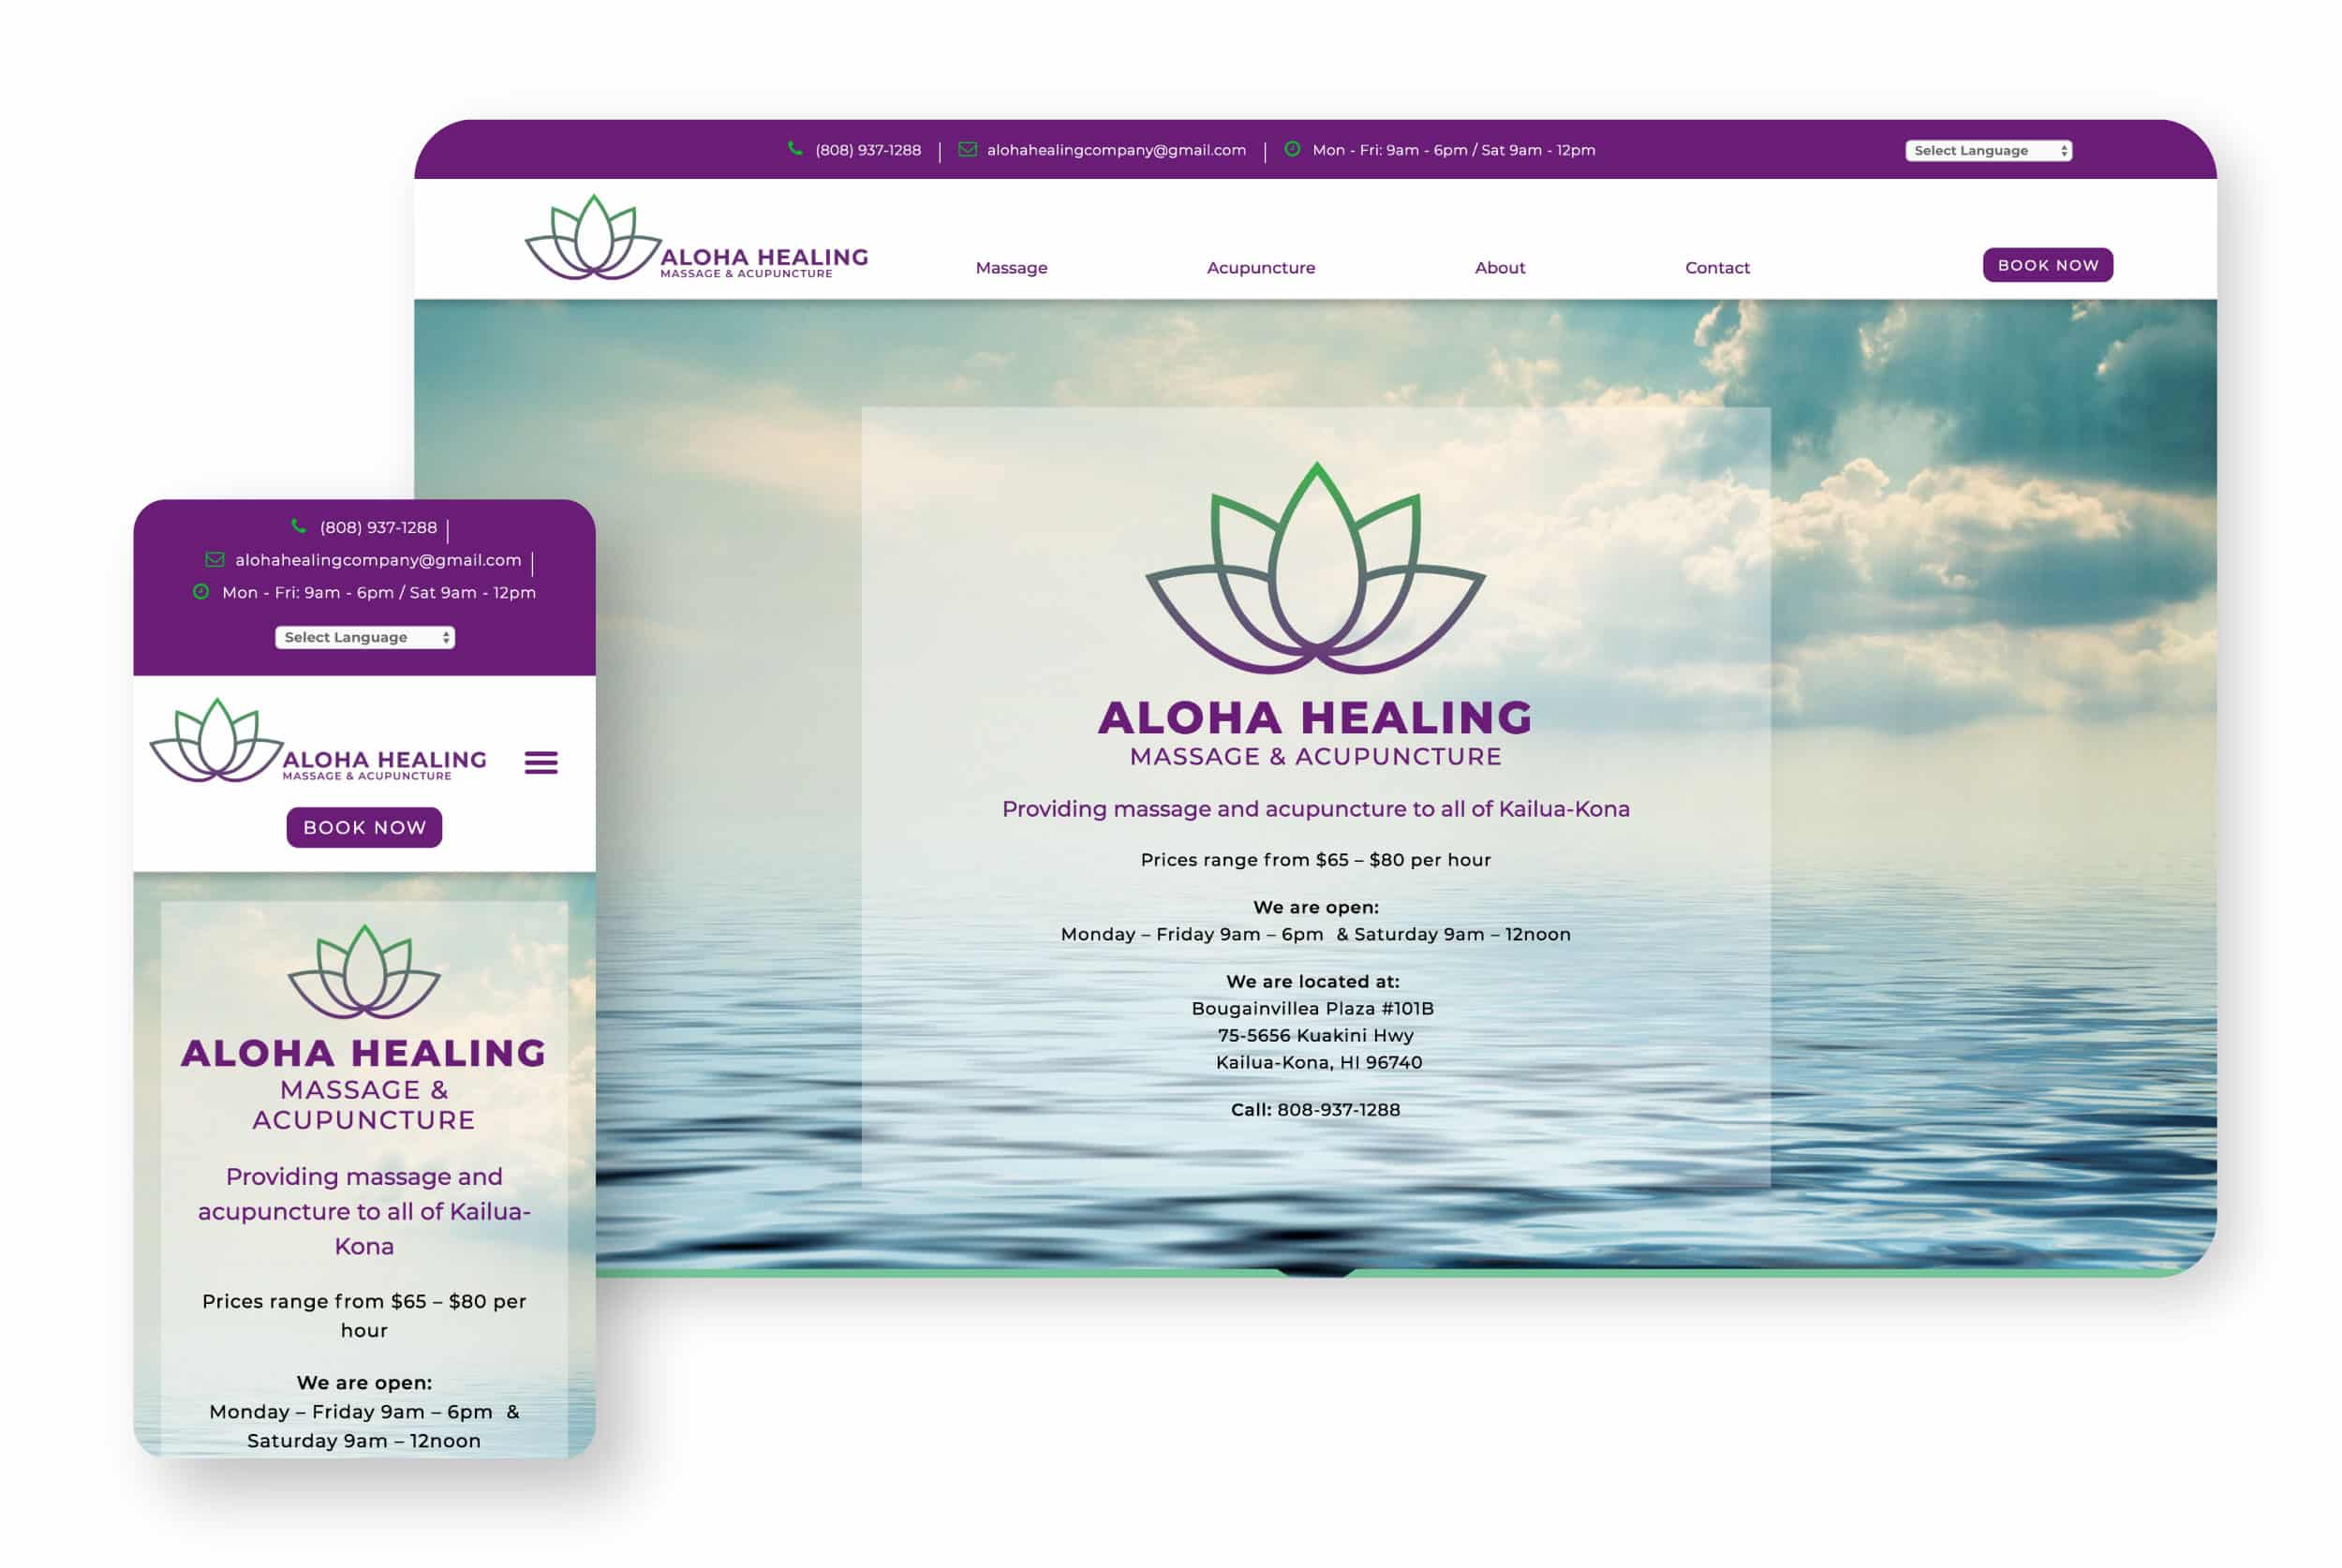 Giant Creative Commerce Website Sample Aloha Healing Massage And Accupunture Website